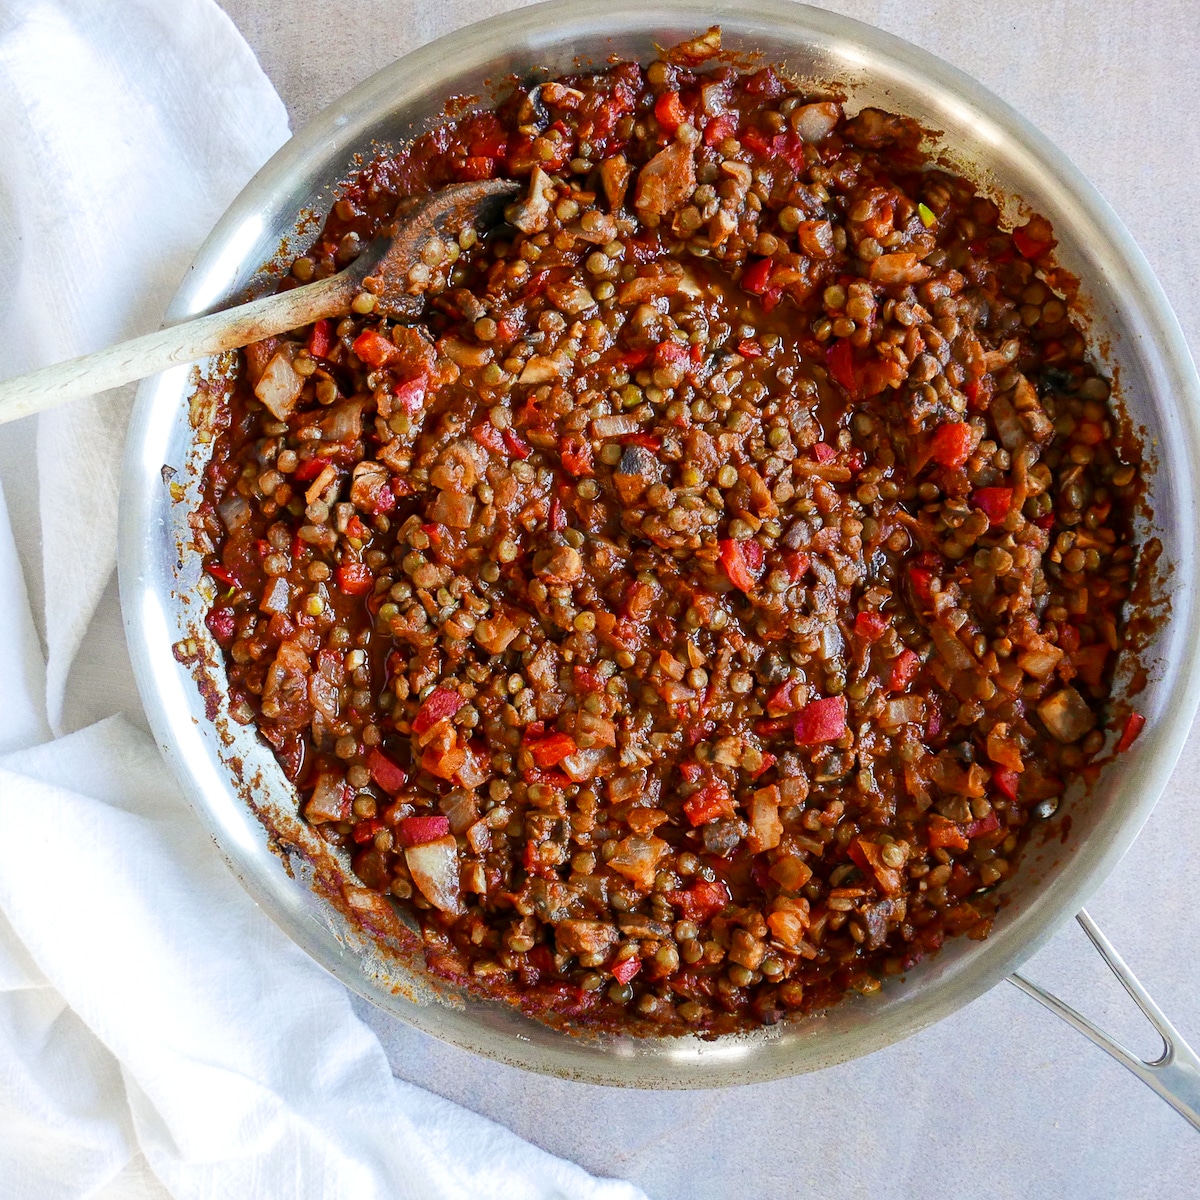 sloppy joe mixture being cooked in a large skillet with a wooden spoon.